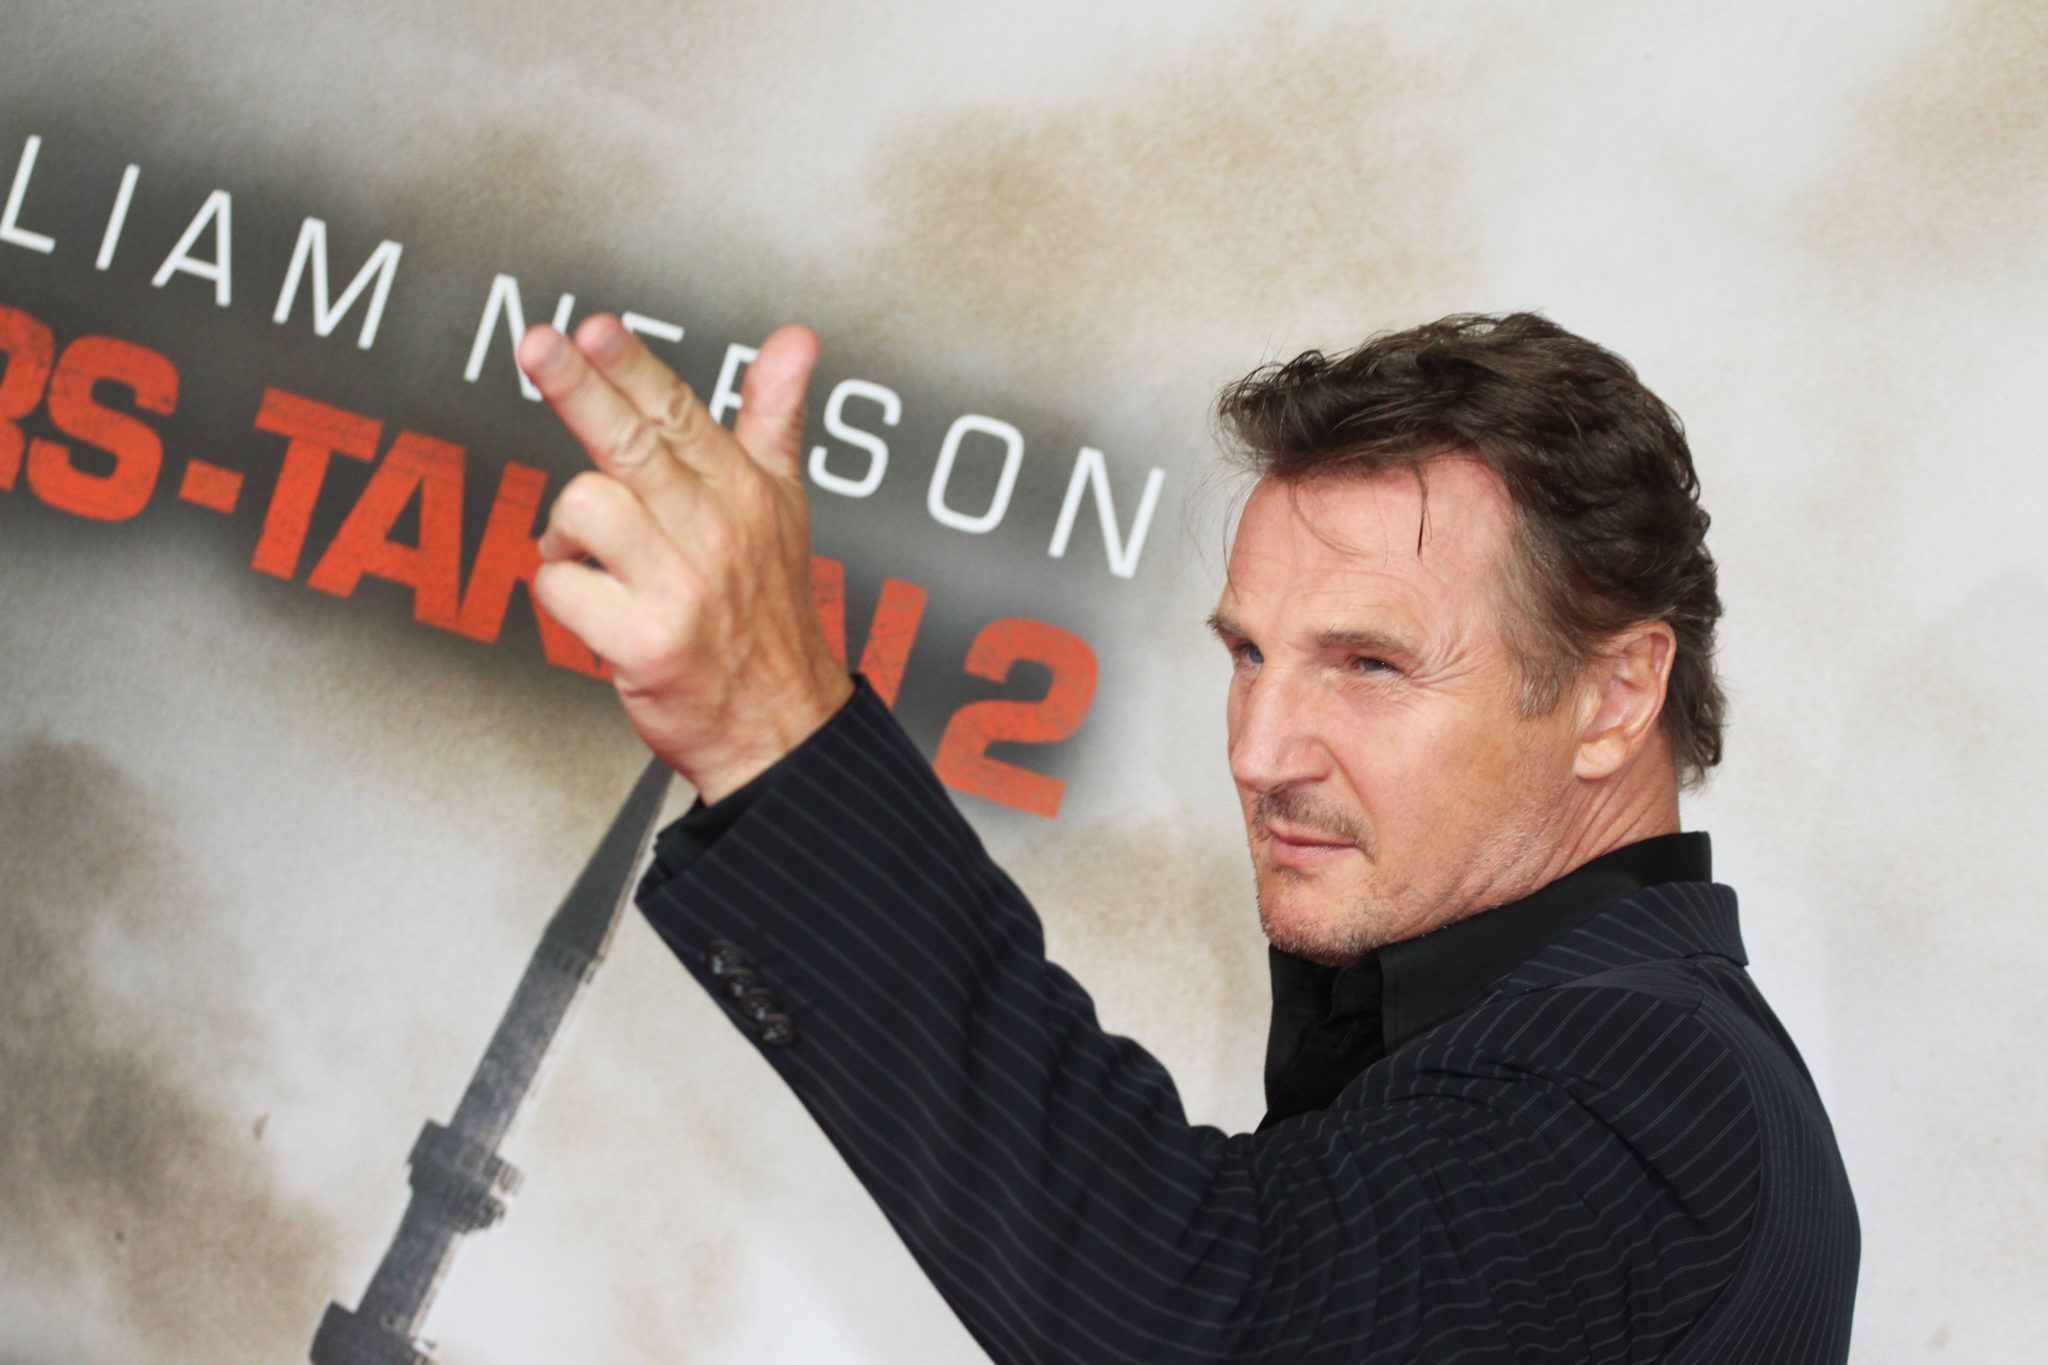 Liam Neeson pointing at camera with two fingers